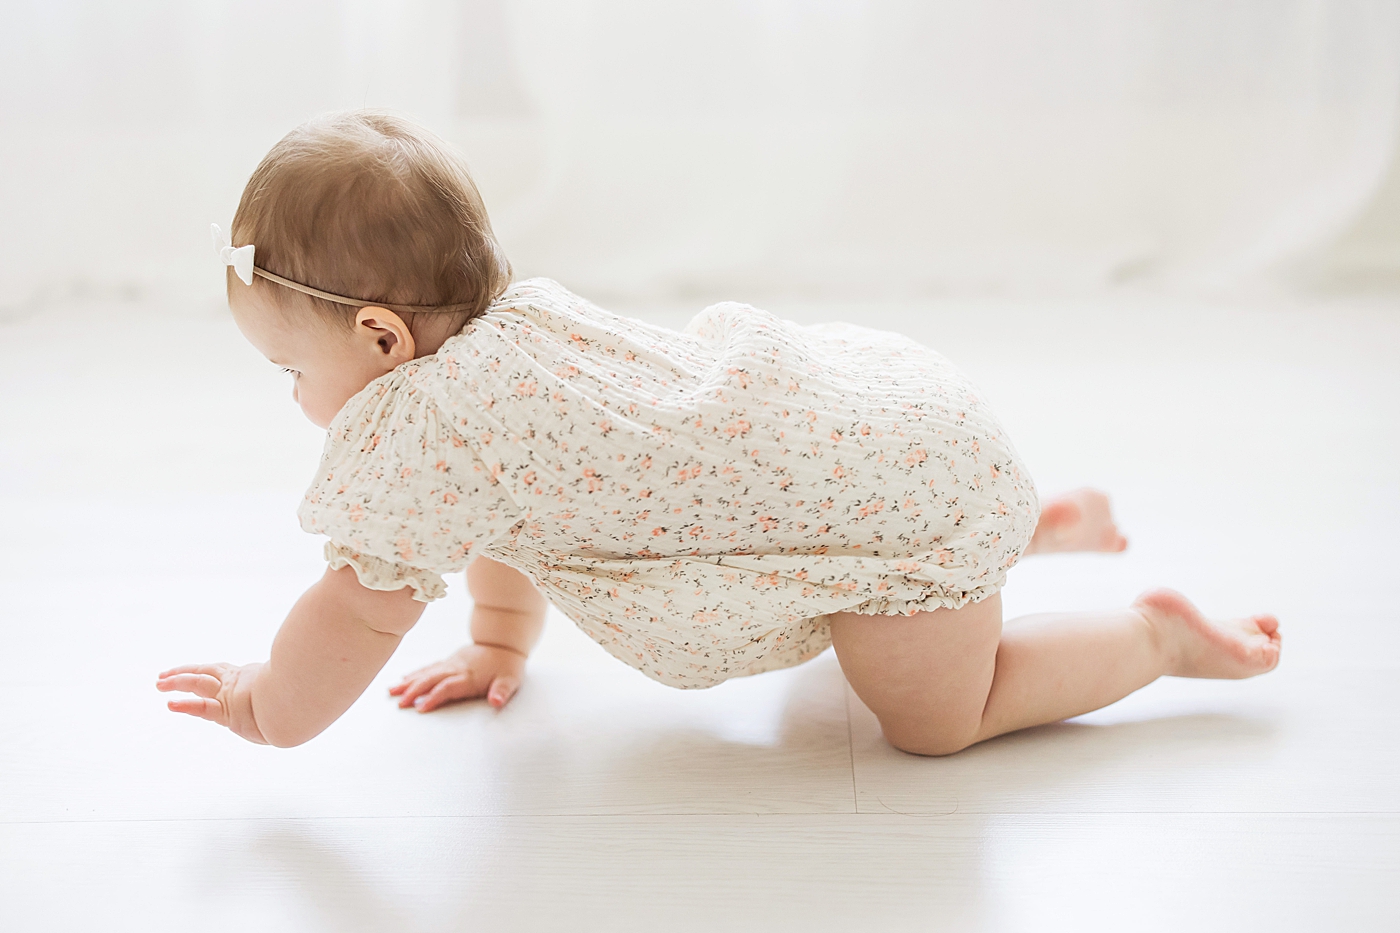 One year old baby girl crawling. Photo by Fresh Light Photography.